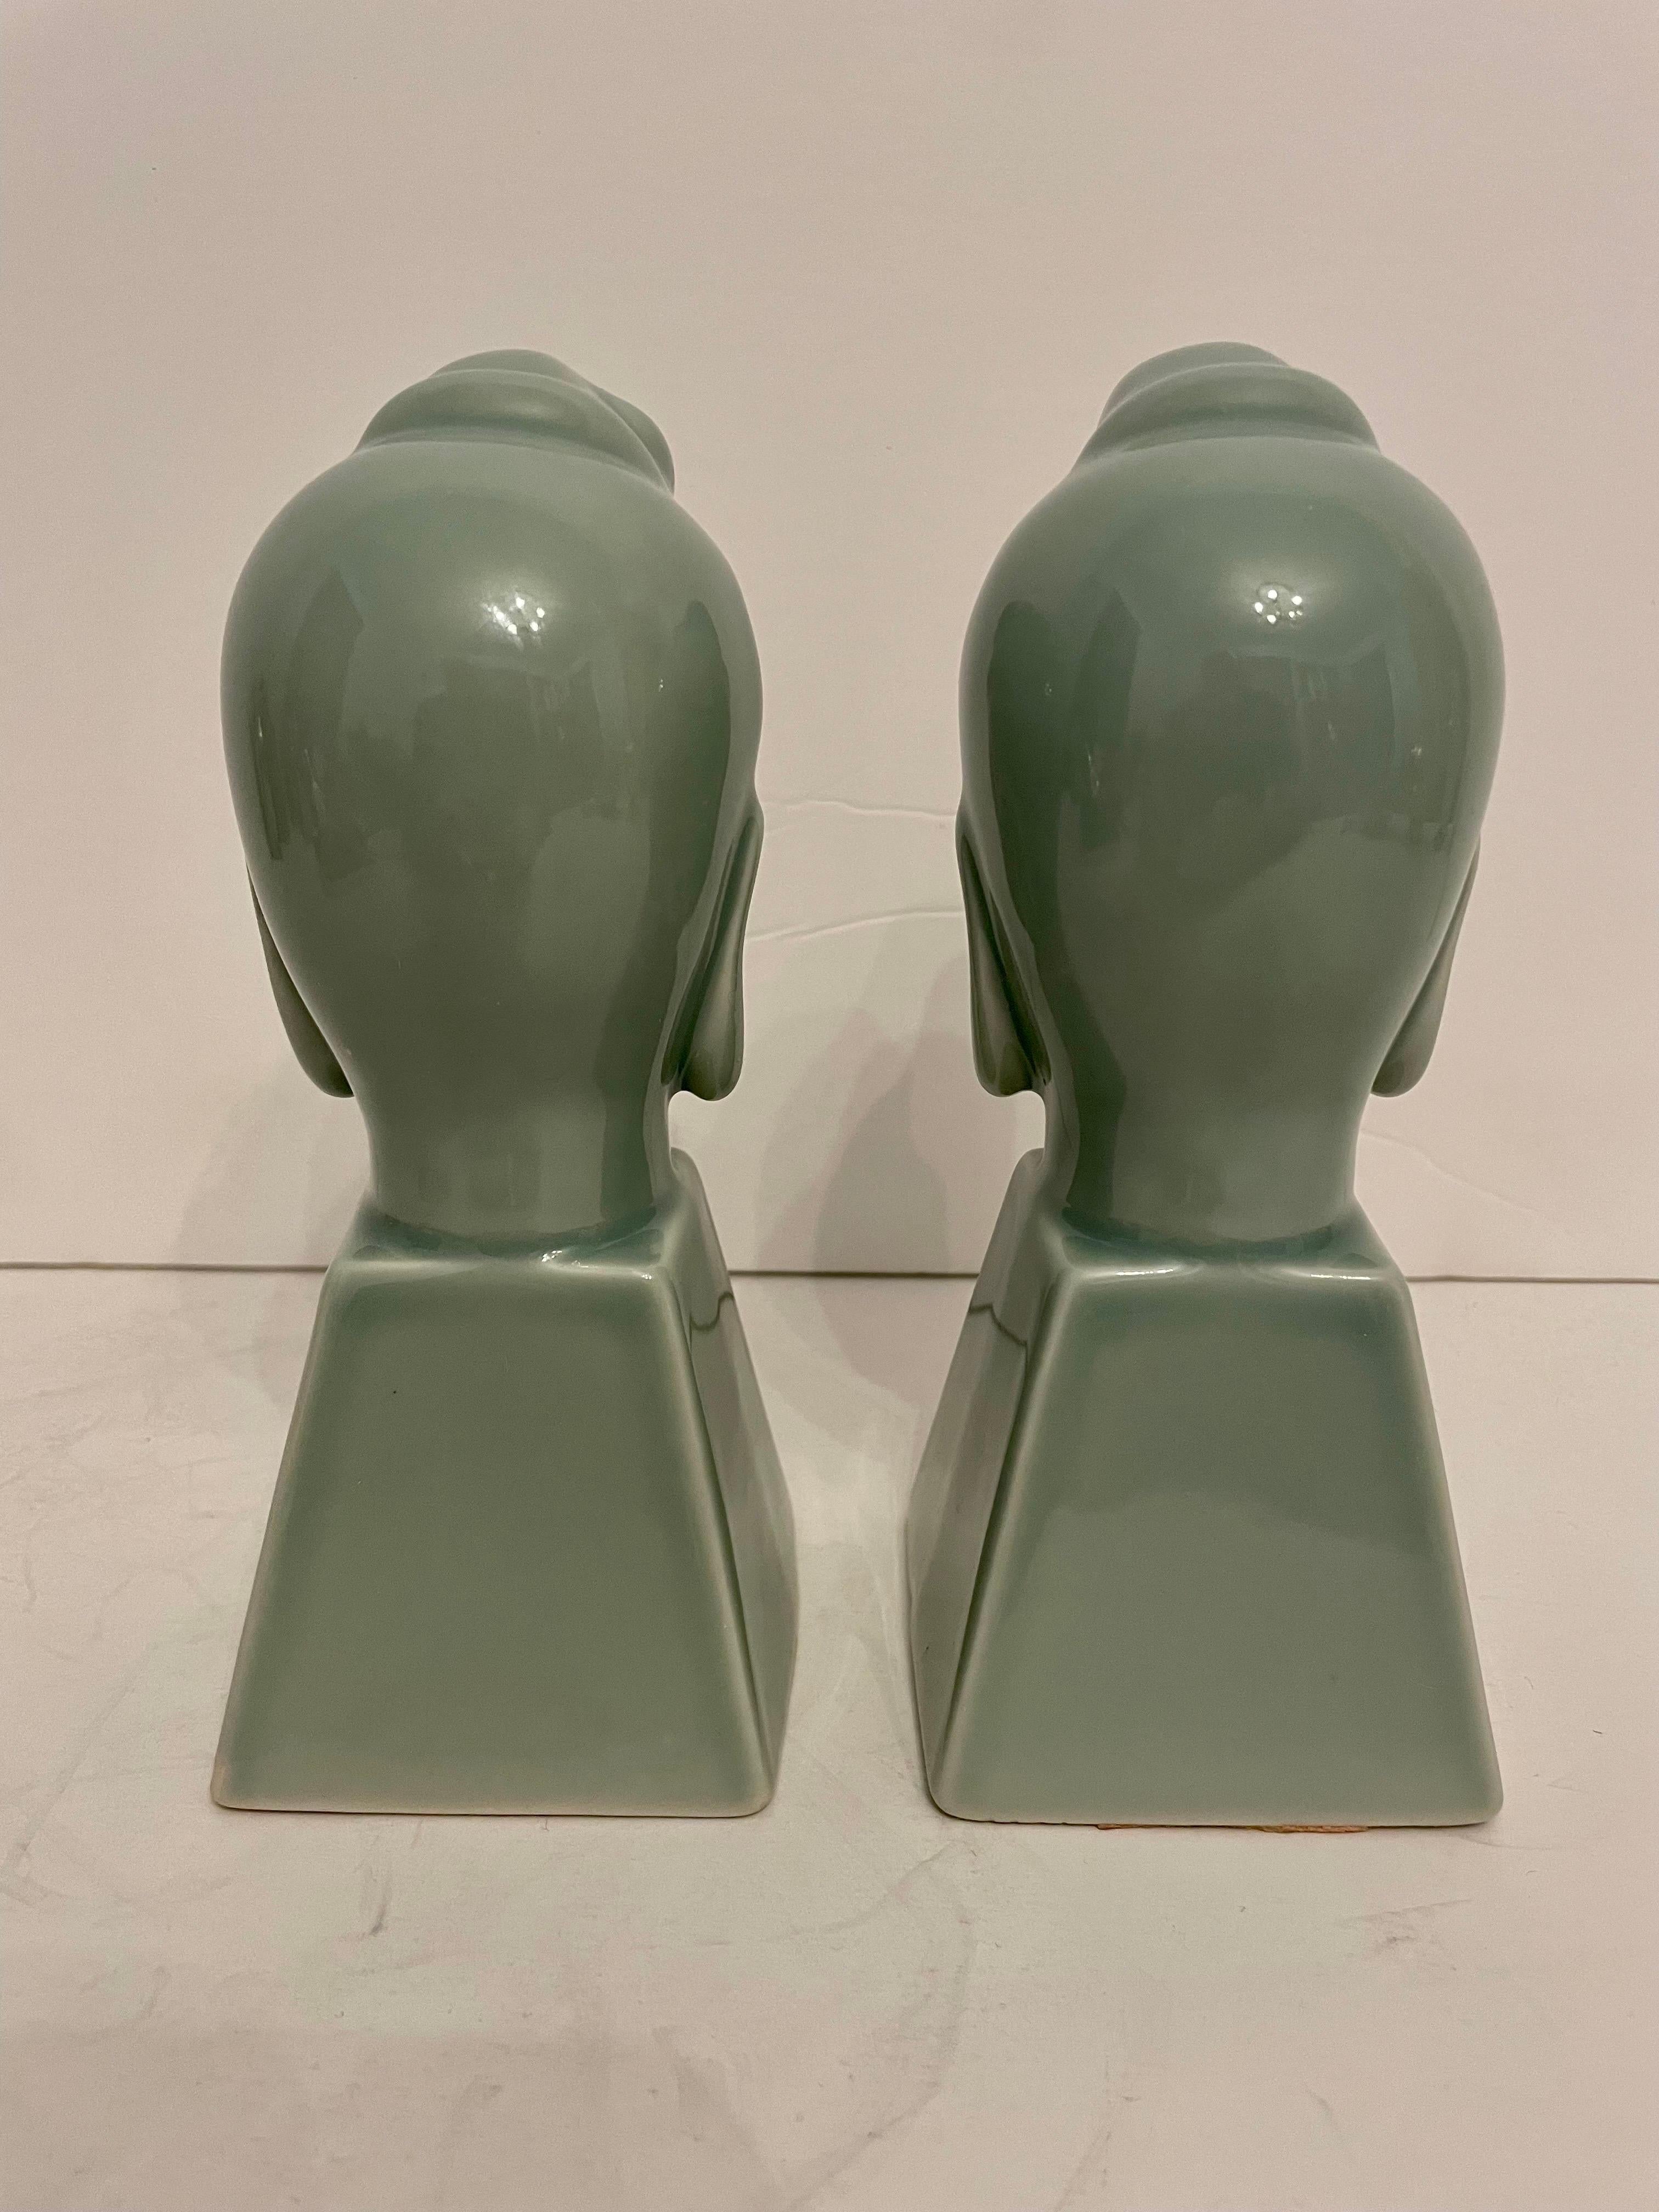 Japanese Pair Buddha Sculptures Or Bookends For Sale